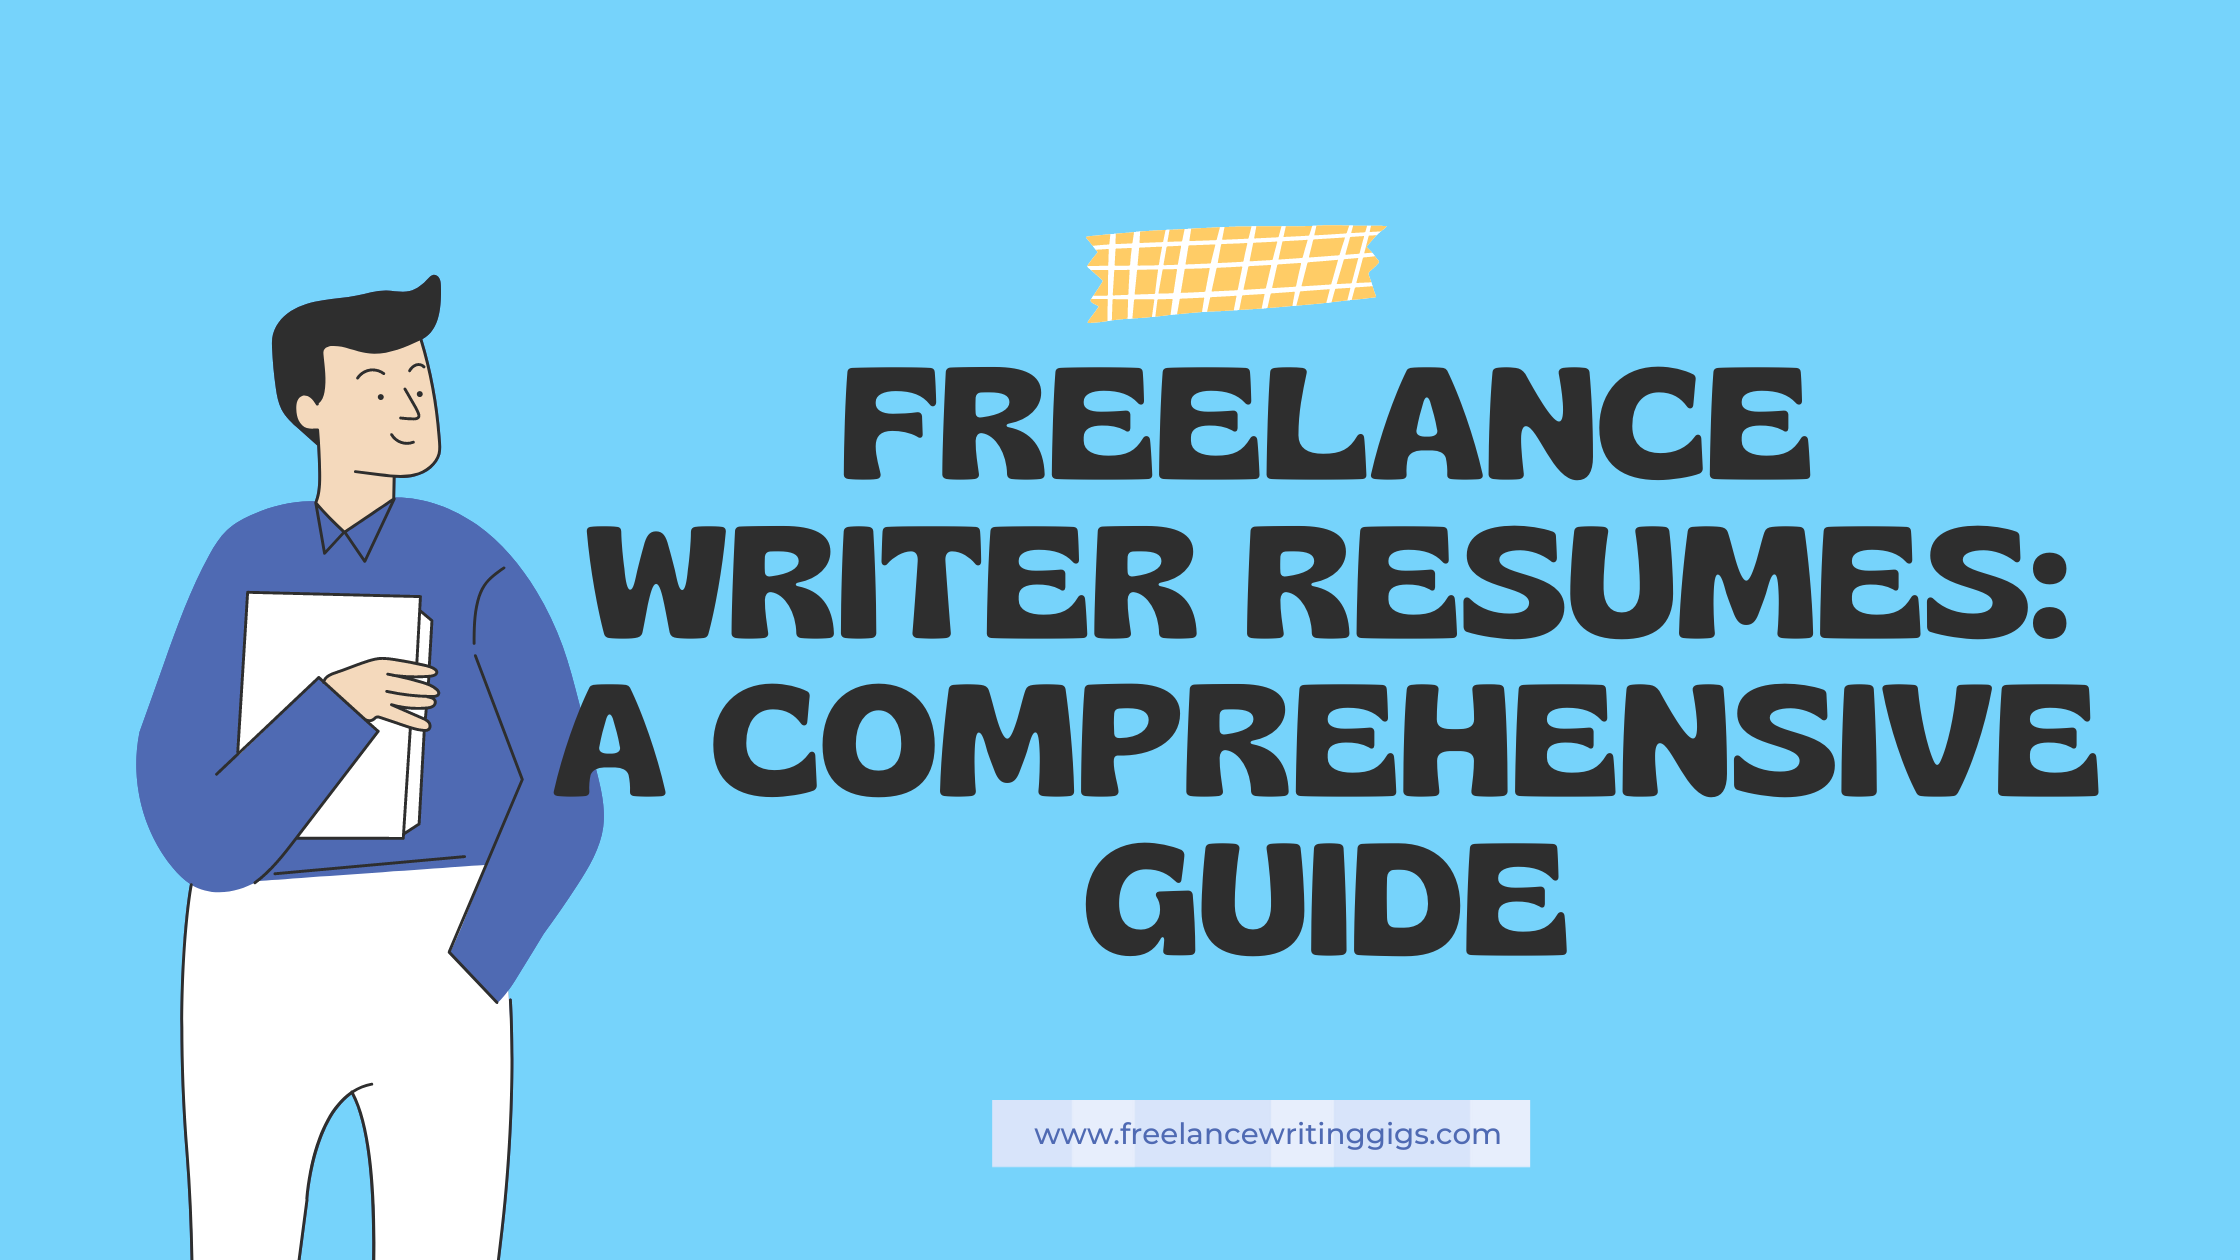 Freelance Writer Resumes: A Comprehensive Guide